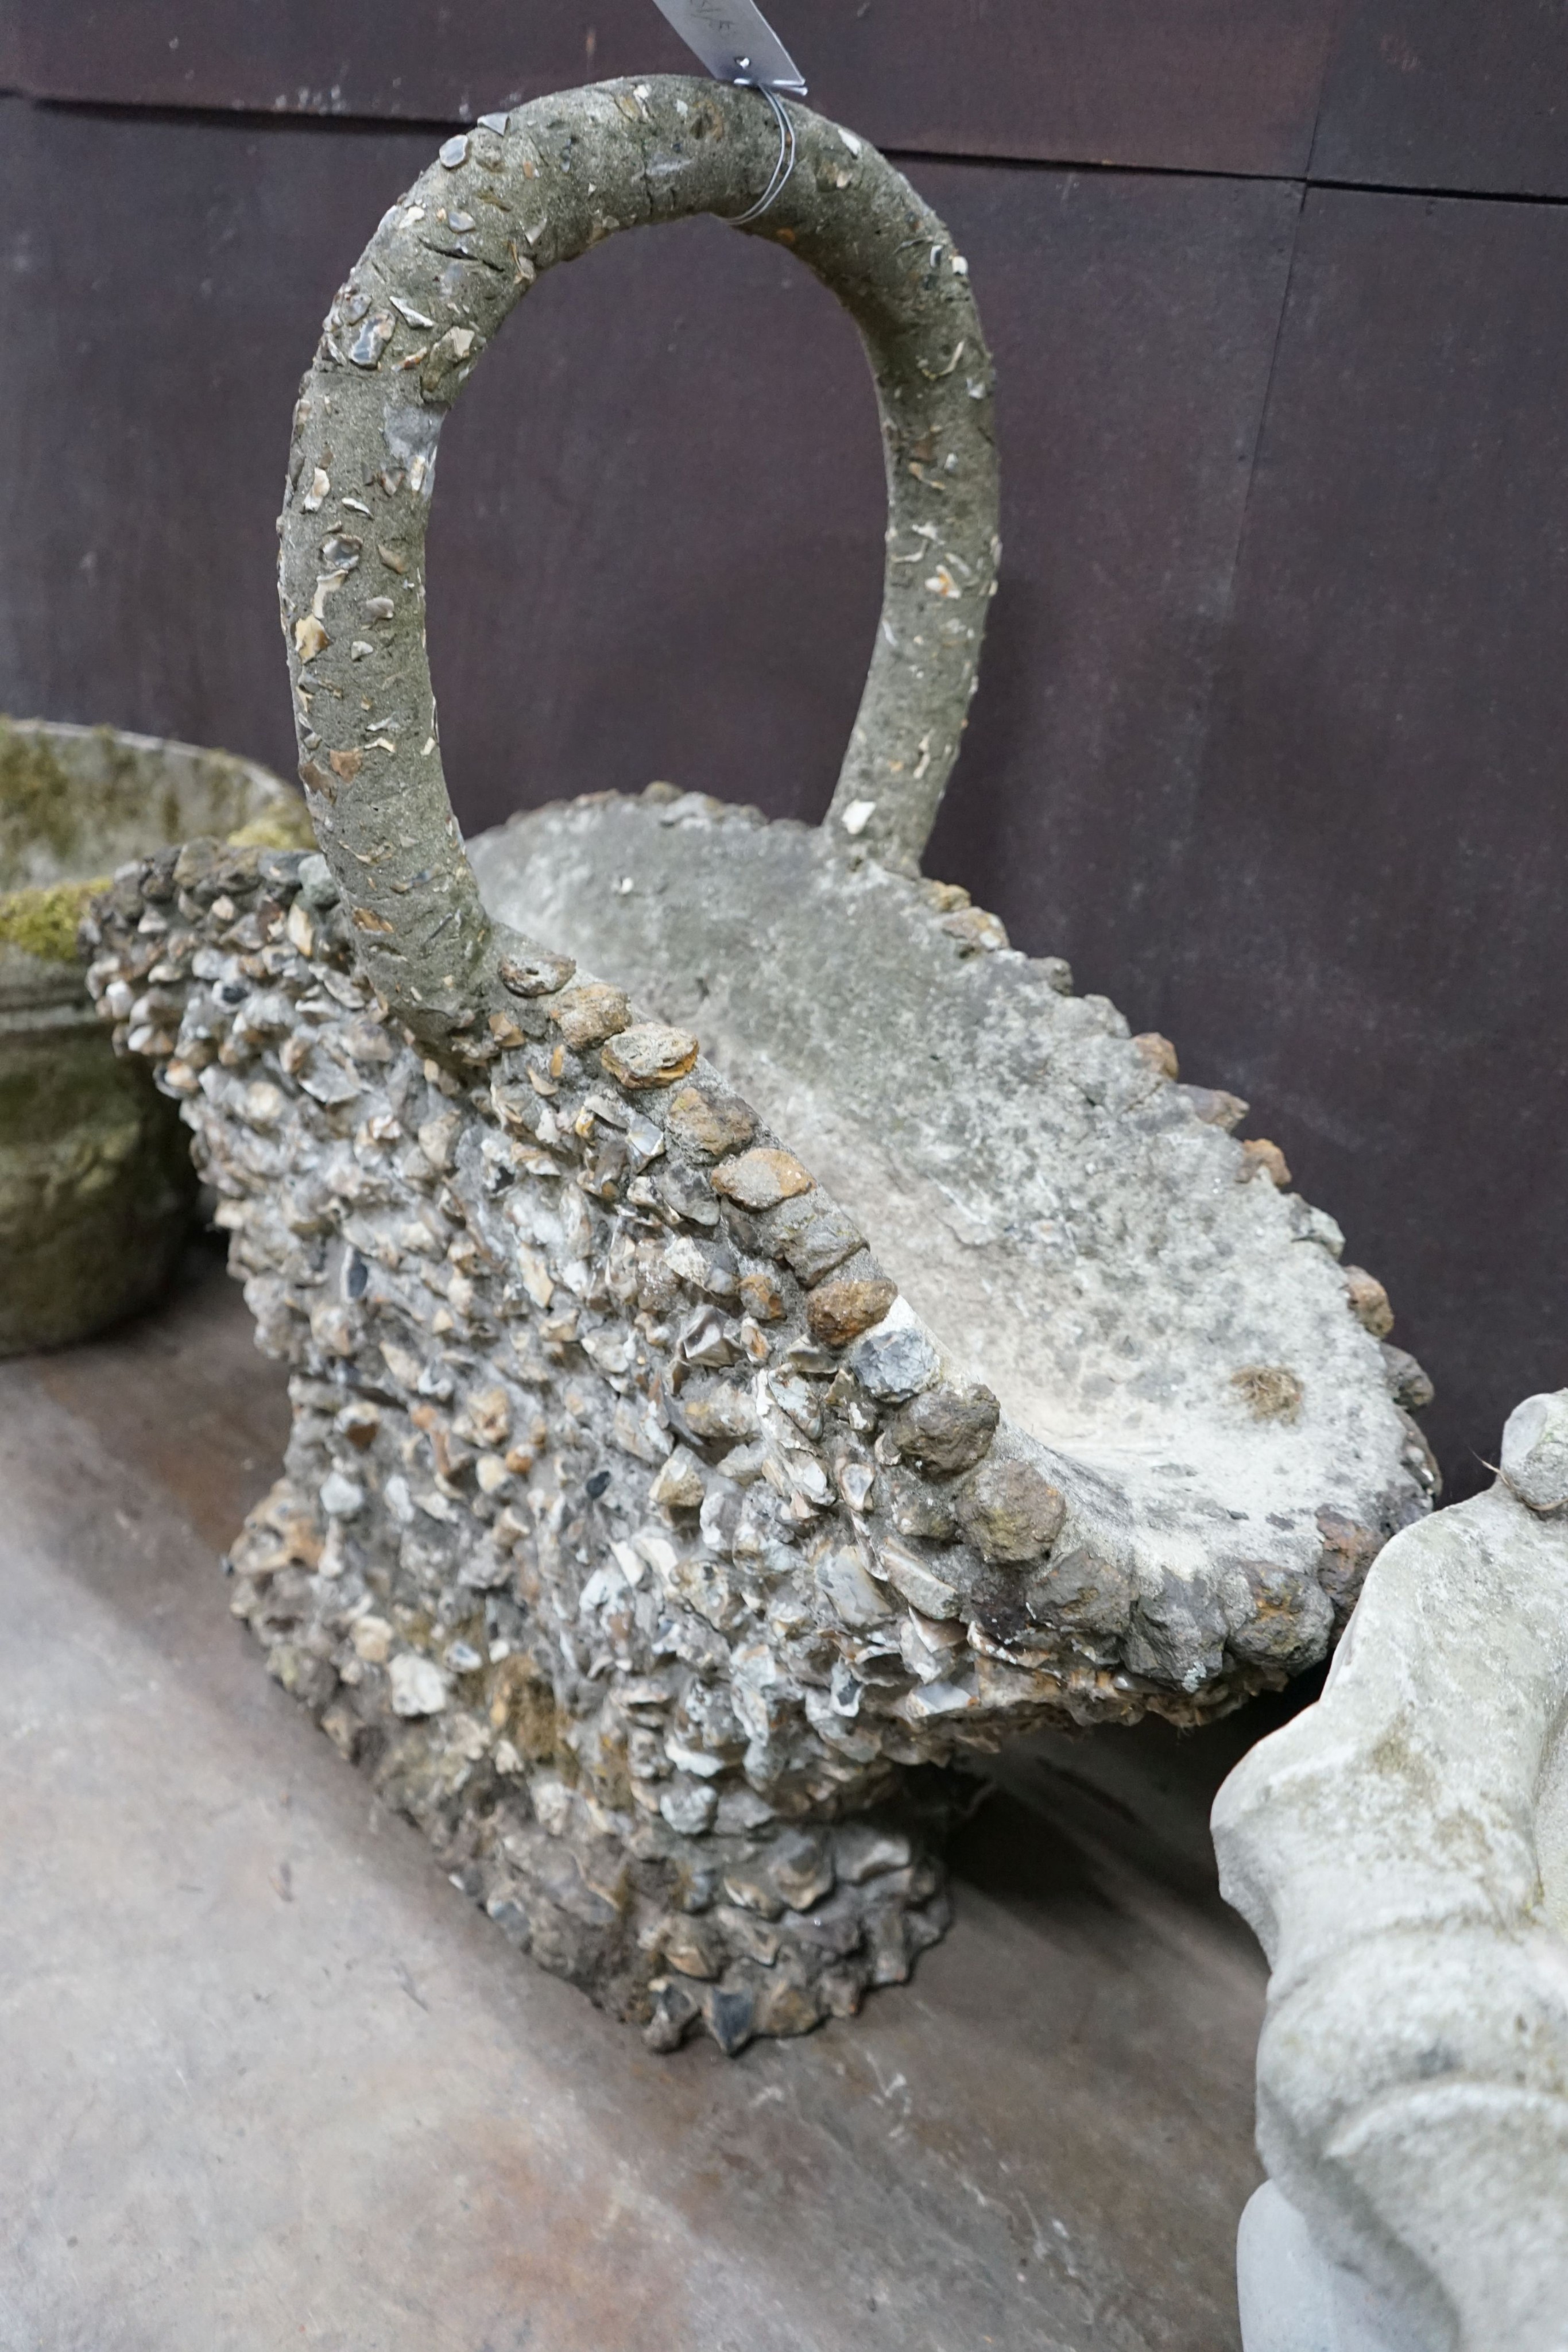 A pebble encrusted reconstituted stone basket garden planter, width 76cm, height 76cm